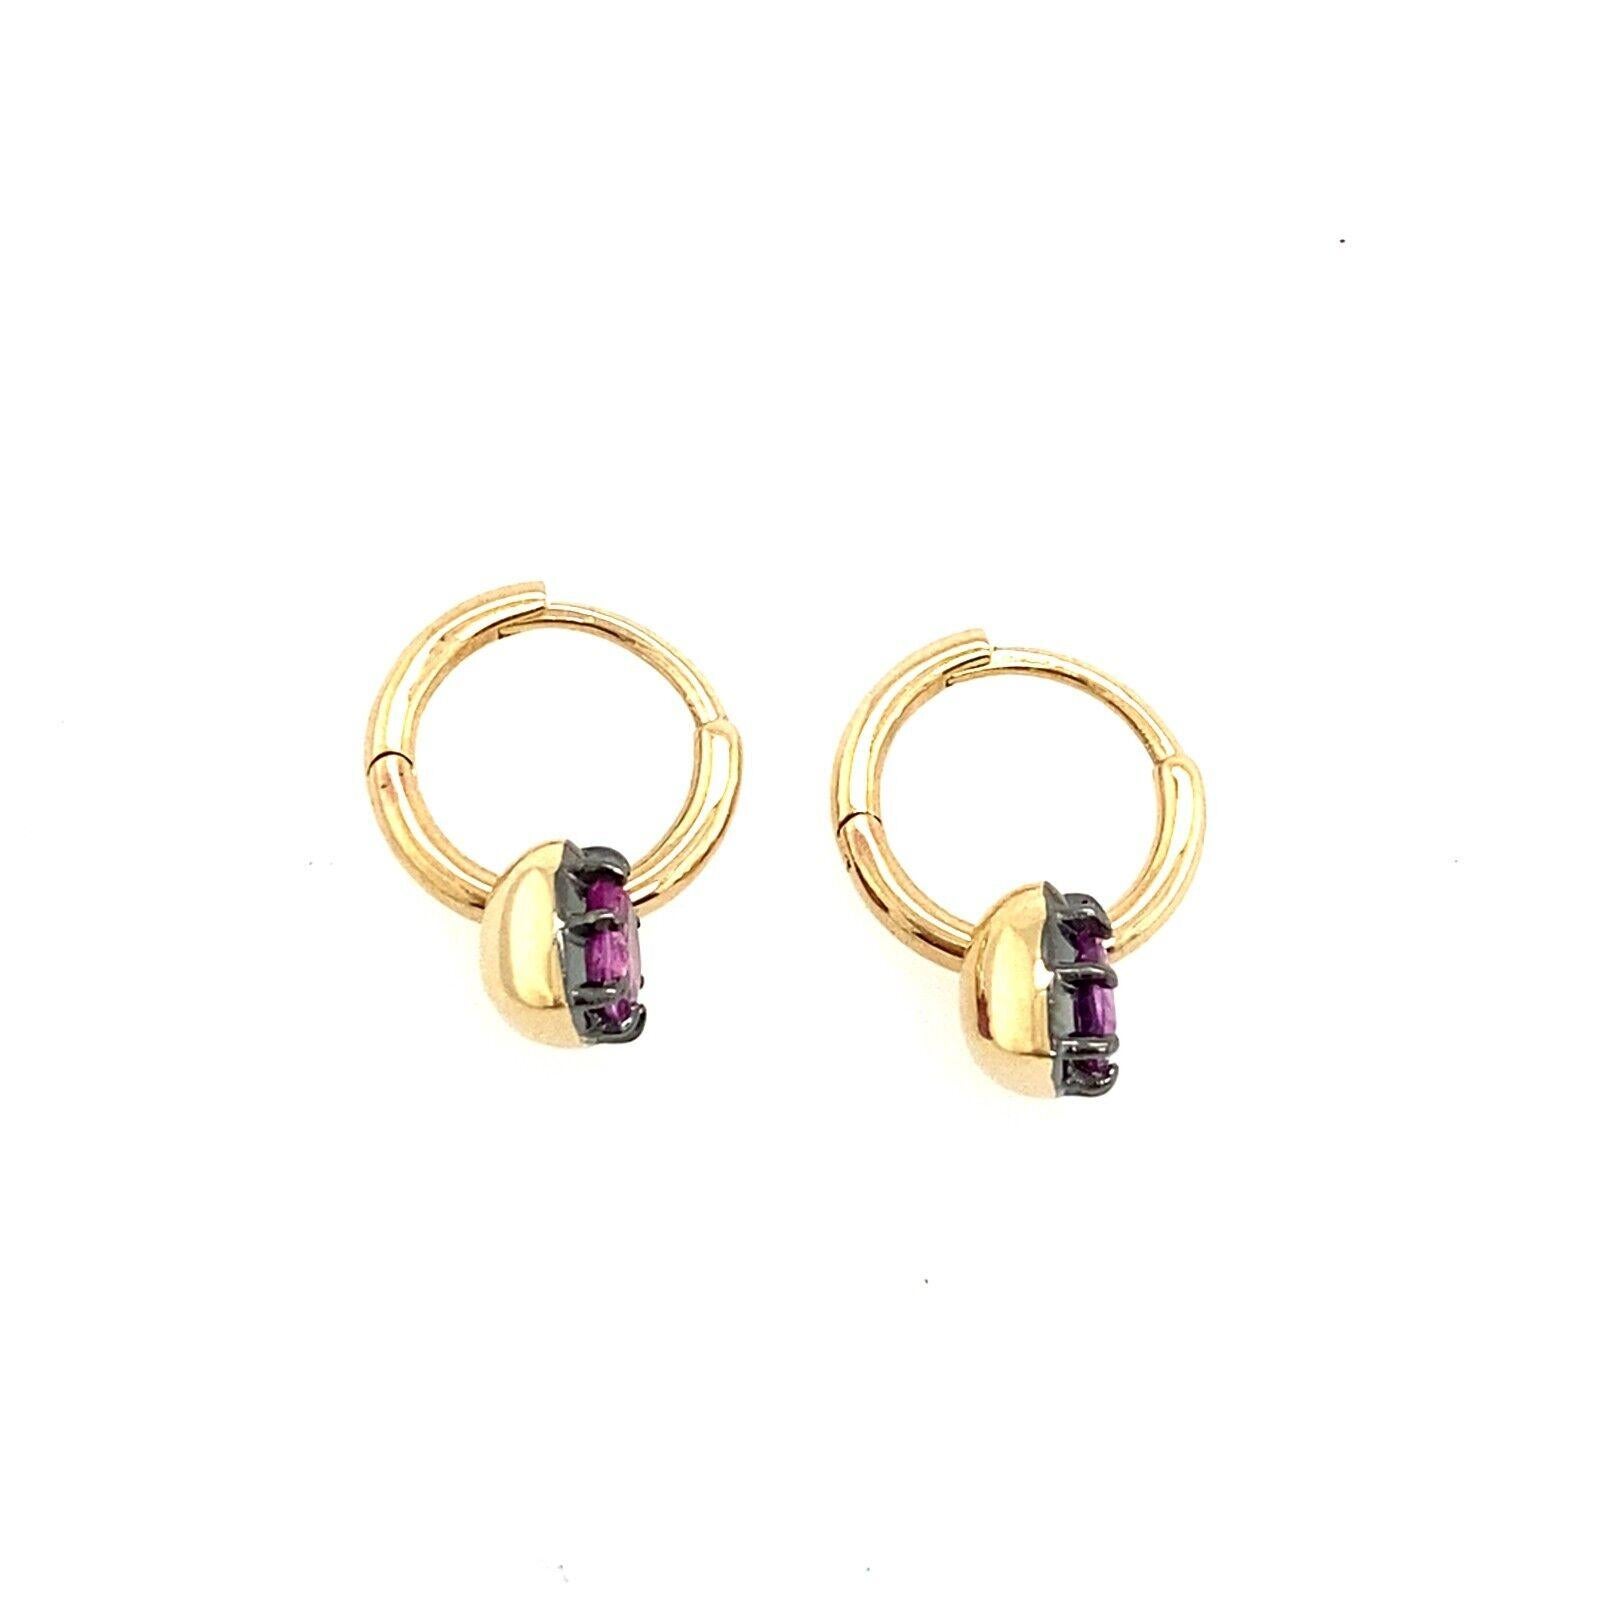 These stunning earrings are the perfect pair to add to your collection. These 14ct Yellow and Black Gold earrings have a total of 2 natural Pink Sapphires in a heart shape each one is set in a prong setting and attached to the hoop plain